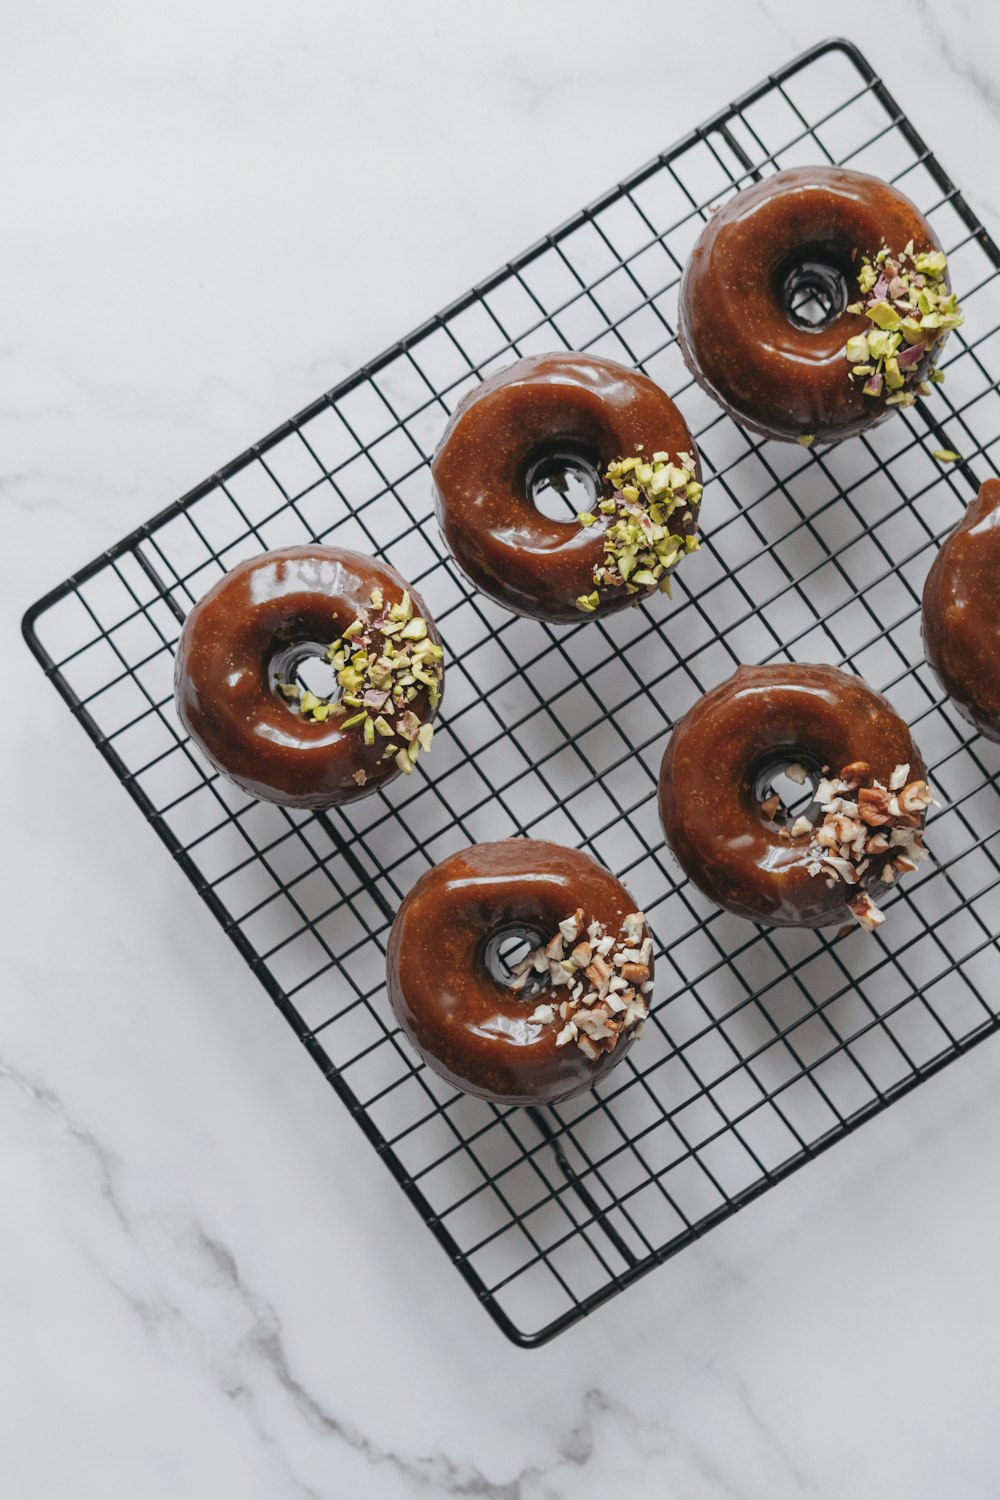 four chocolate donuts on a cooling rack on a marble counter